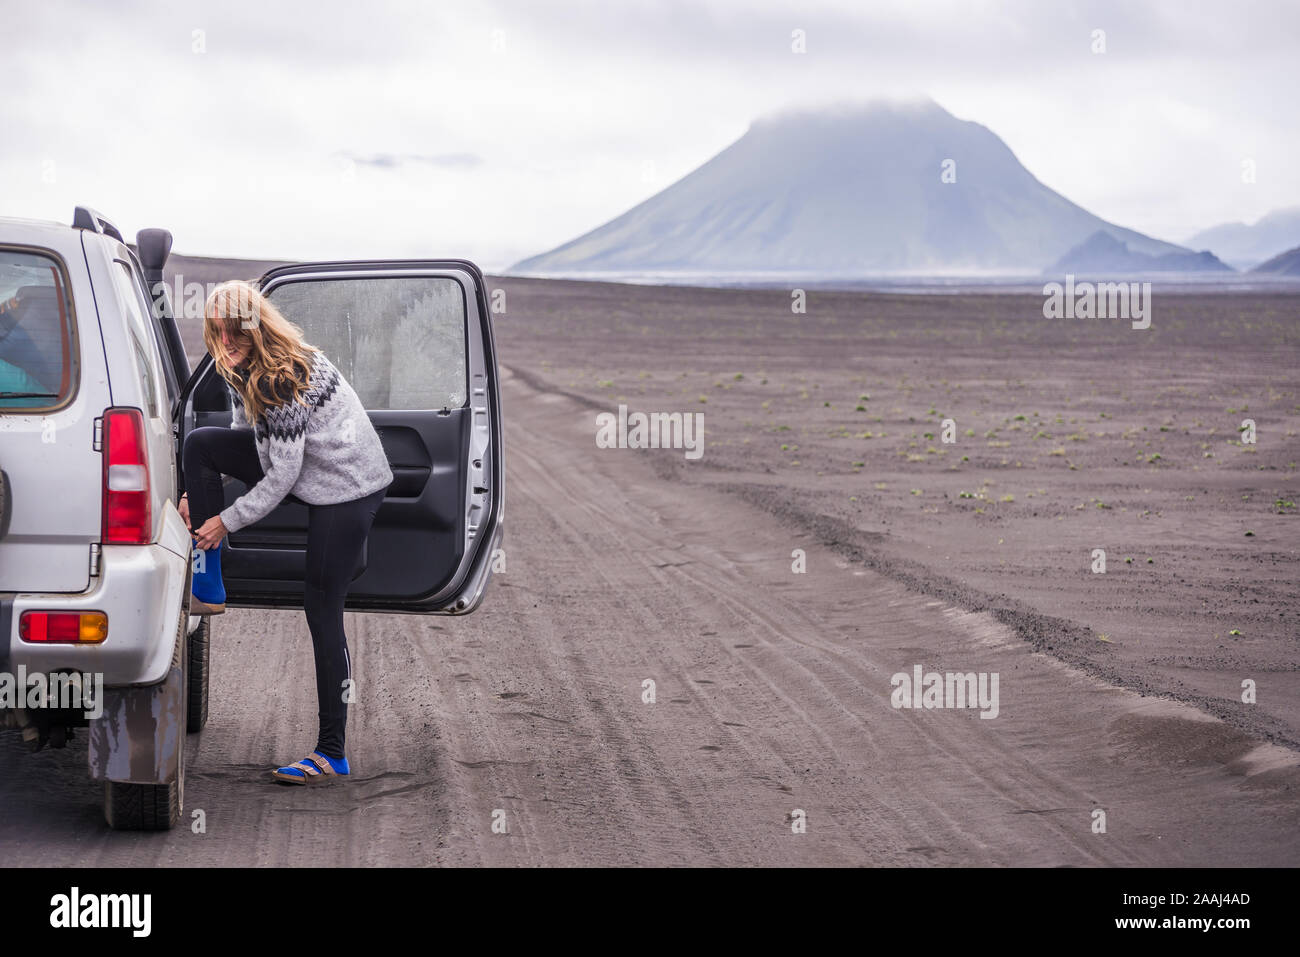 Woman changing shoes by vehicle door on dirt track, Landmannalaugar, Iceland Stock Photo